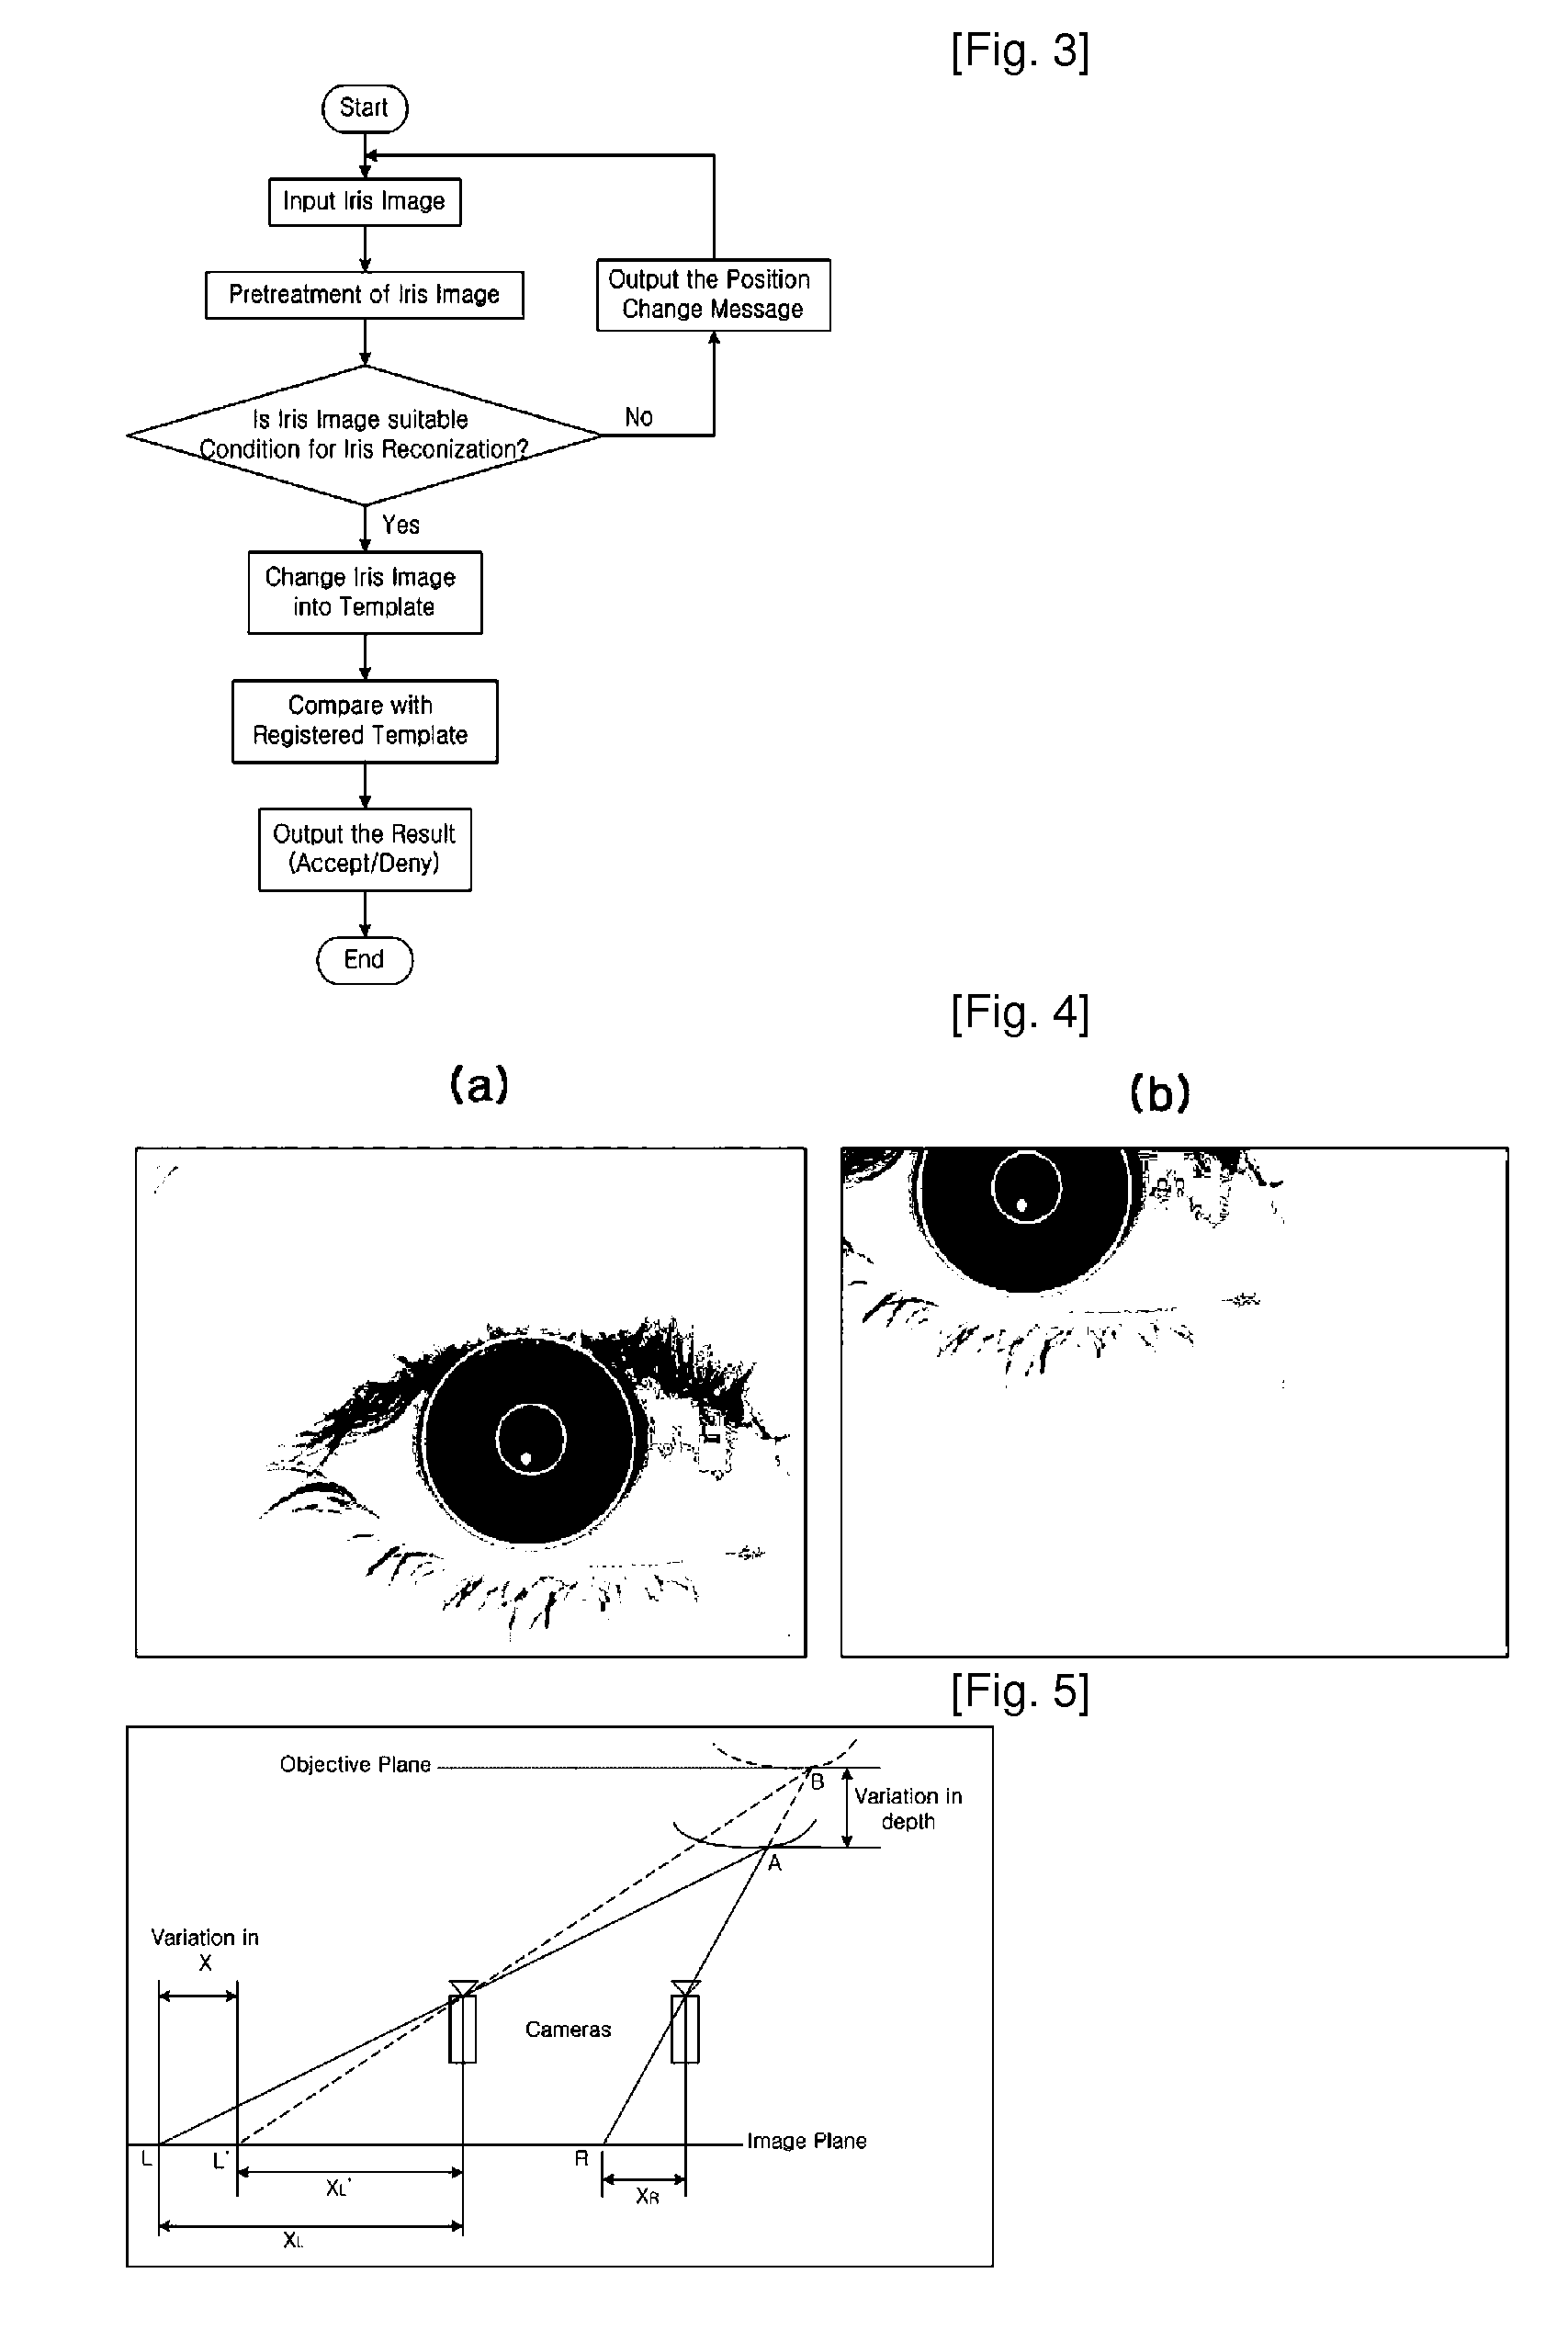 Iris Identification System and Method Using Mobile Device with Stereo Camera